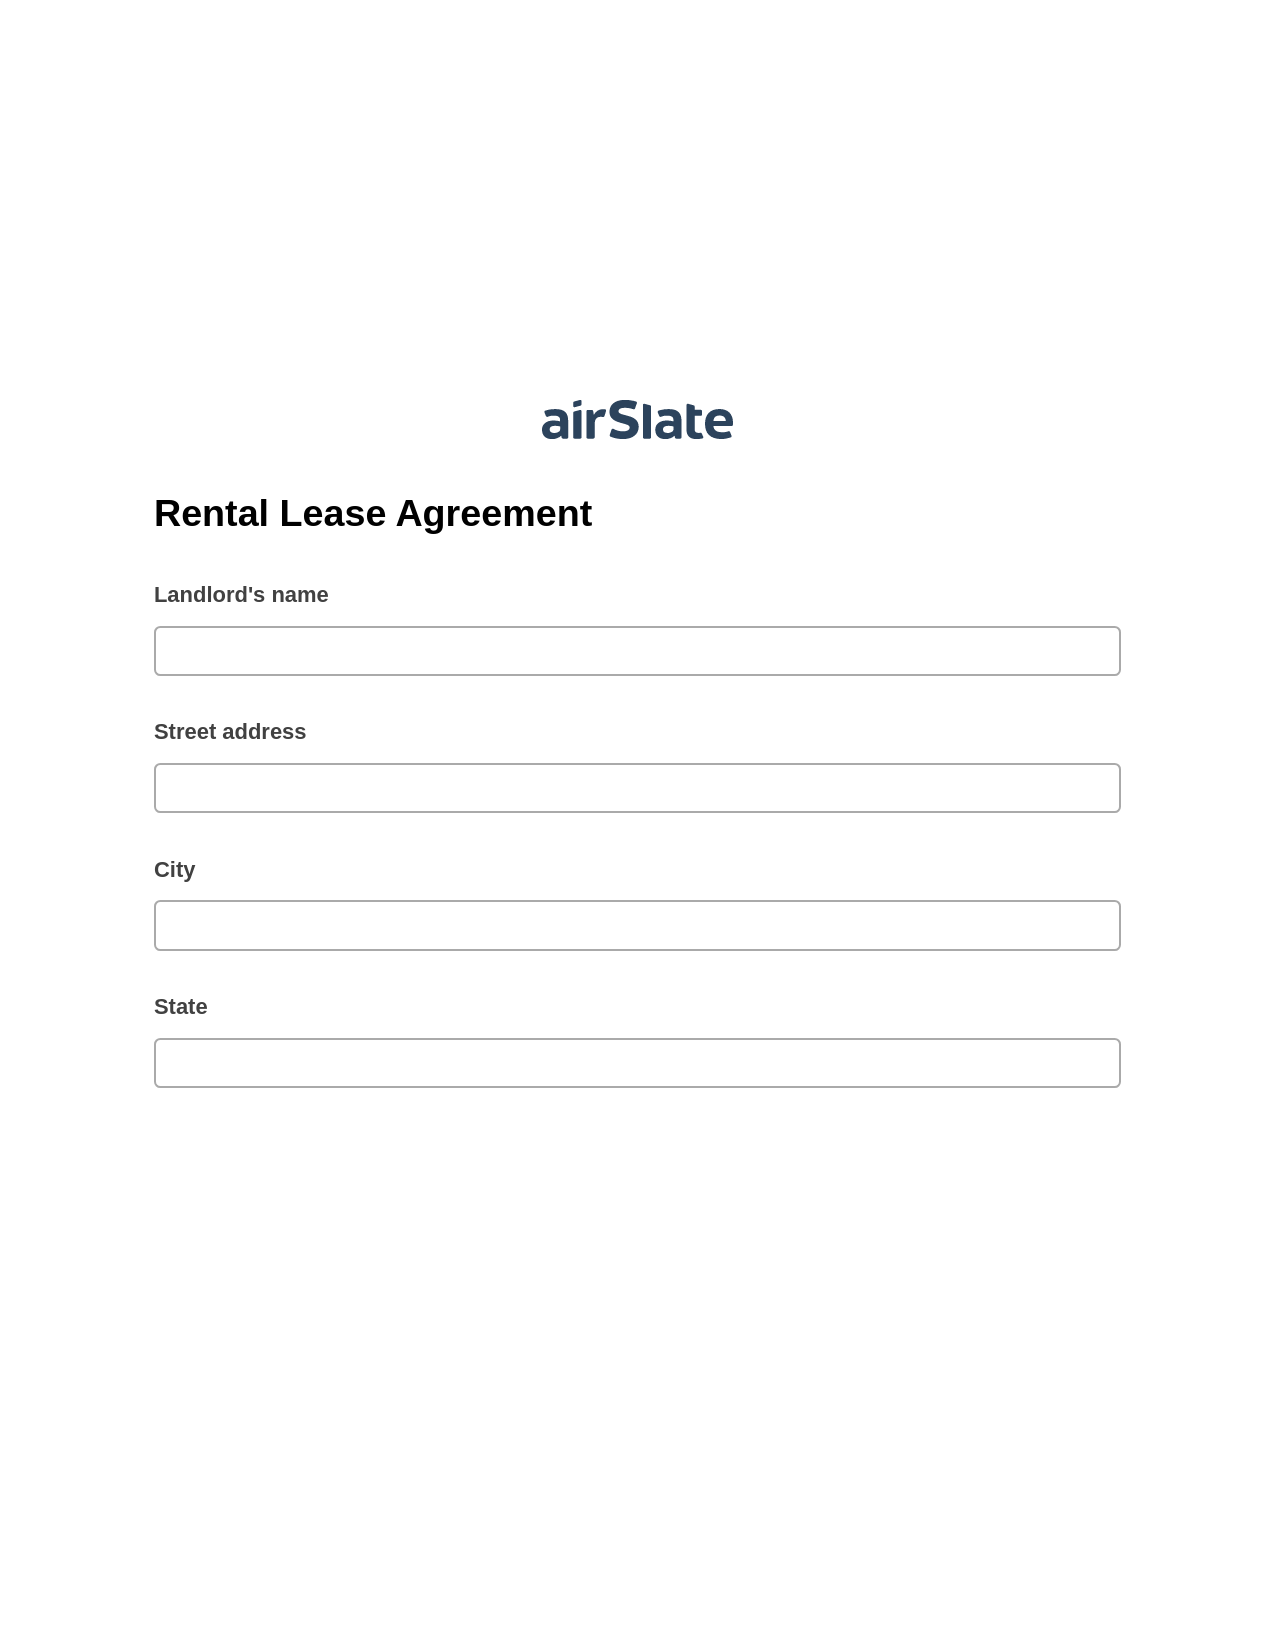 Rental Lease Agreement Pre-fill from MySQL Dropdown Options Bot, Roles Reminder Bot, Export to Smartsheet